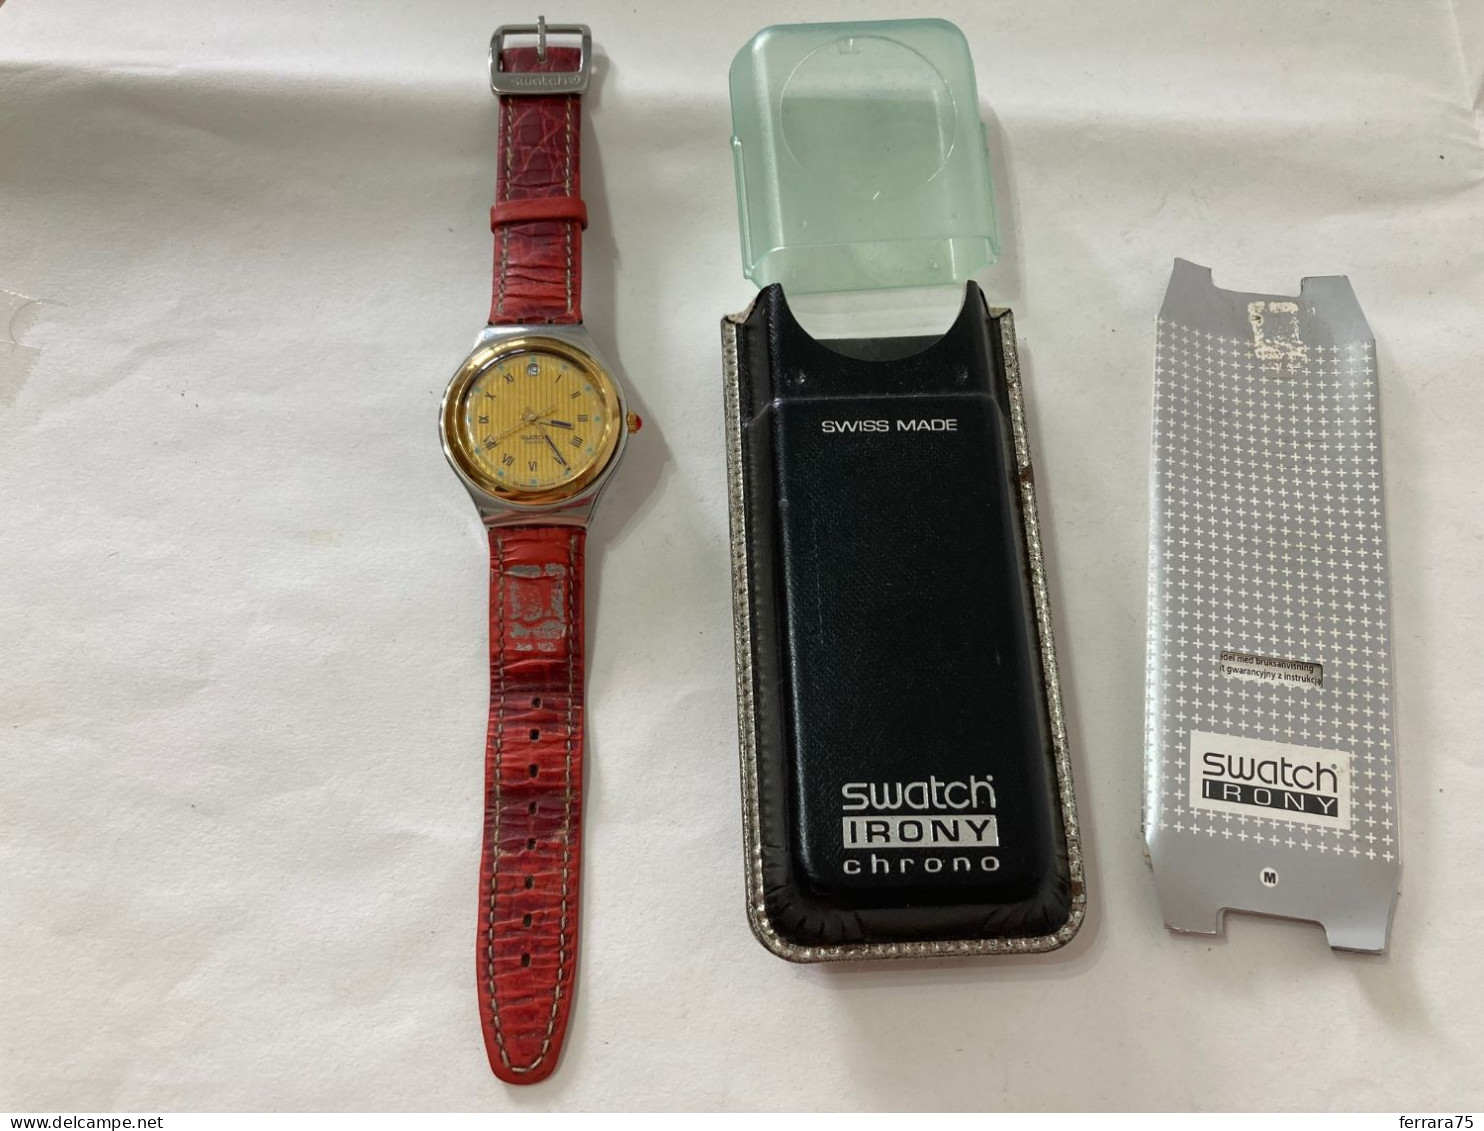 SWATCH IRONY BIG CROWNED HEAD with GOLD BUCKLE - YGS402 - 1995 - FUNZIONANTE.